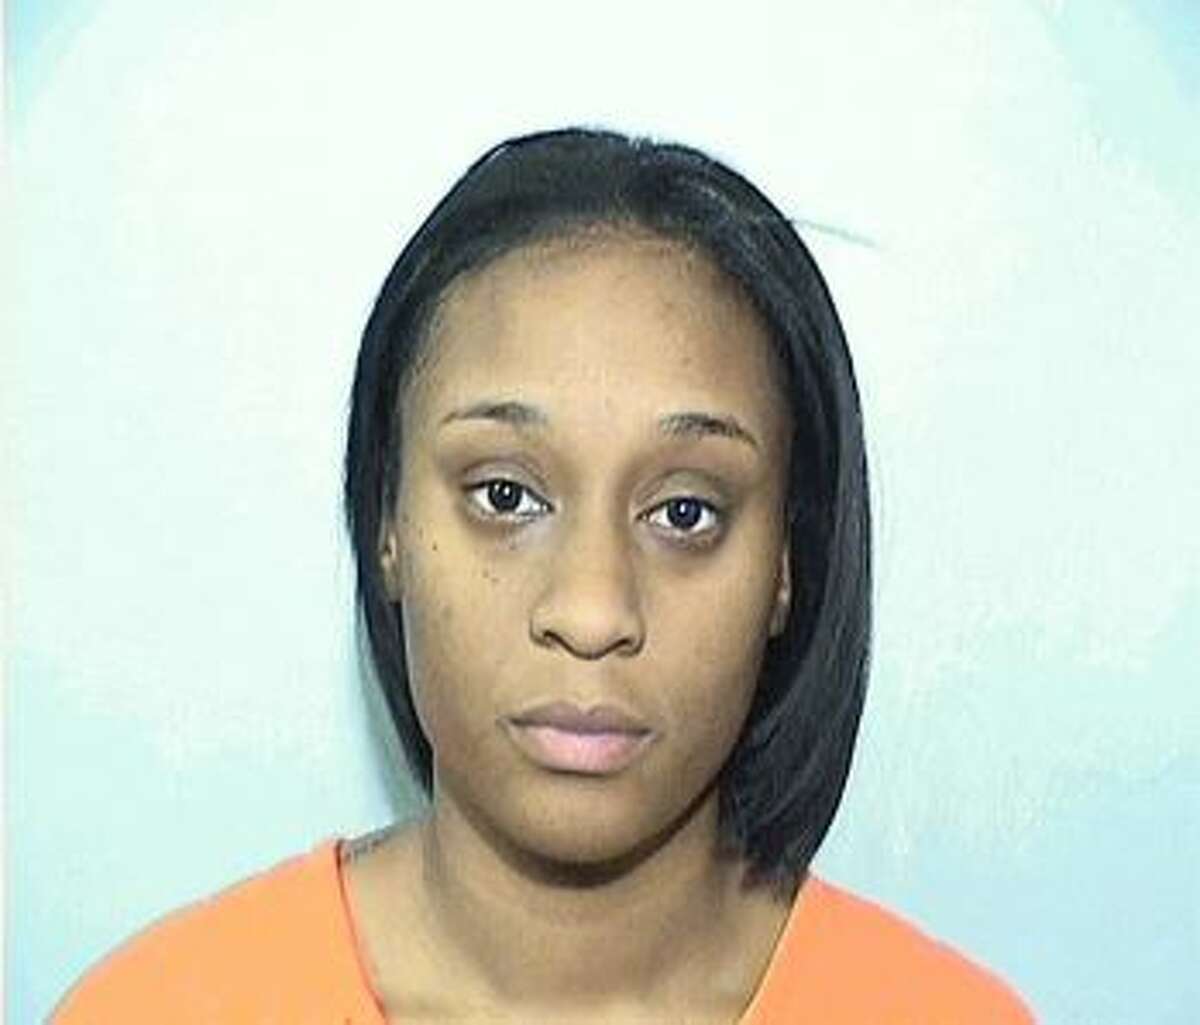 Barbera Wilson, 21, was charged with federal possession with intent to distribute controlled substances after an operation in Toledo, Ohio.